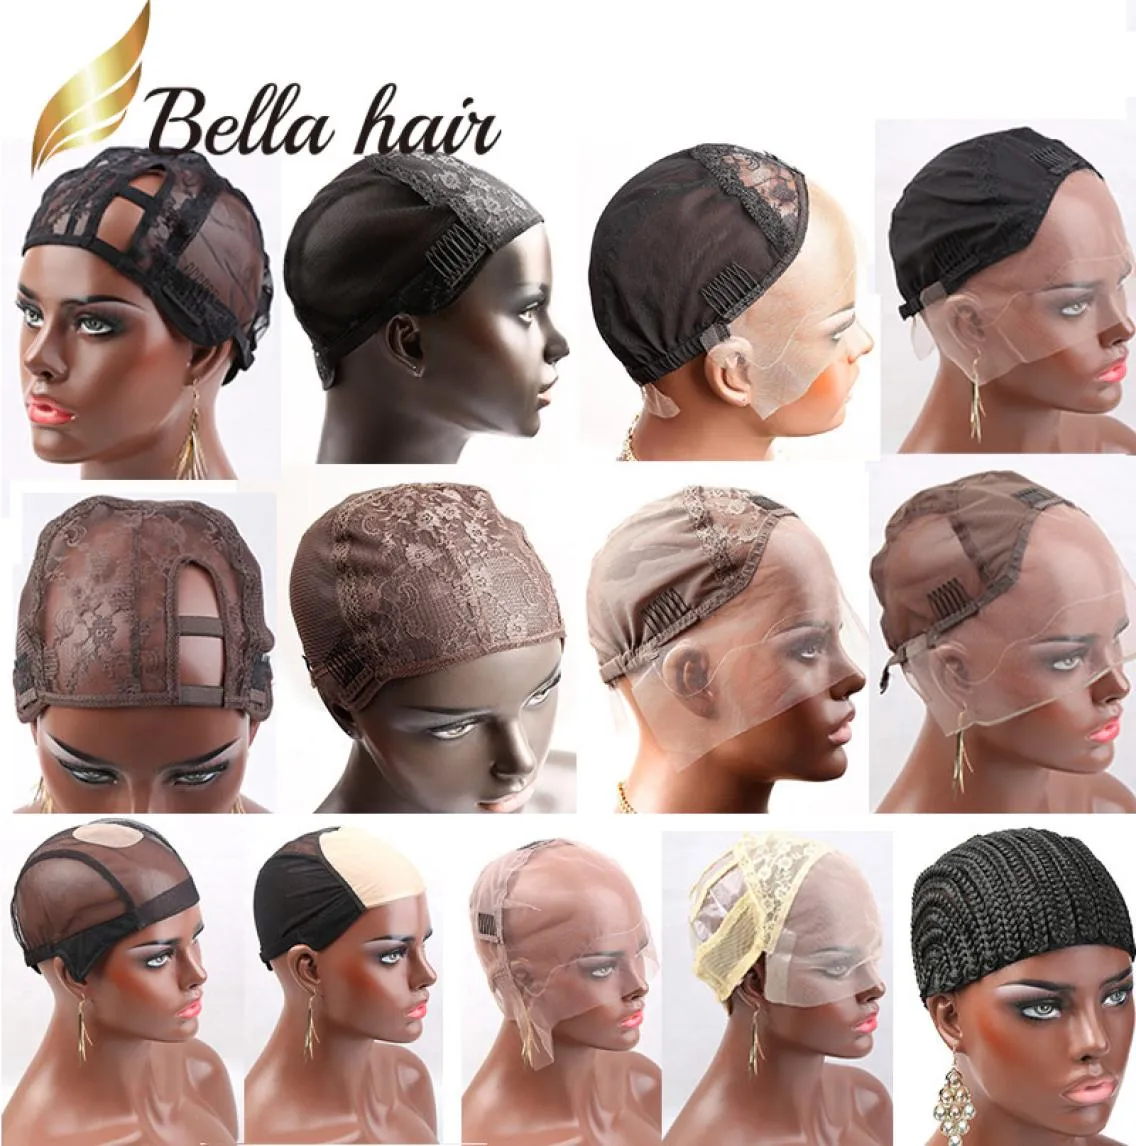 Bella Hair Professional Lace Wig Caps for Making Wig Different Types Lace Color BlackBrownBlonde Swiss Lace Cap Size LMS6449799